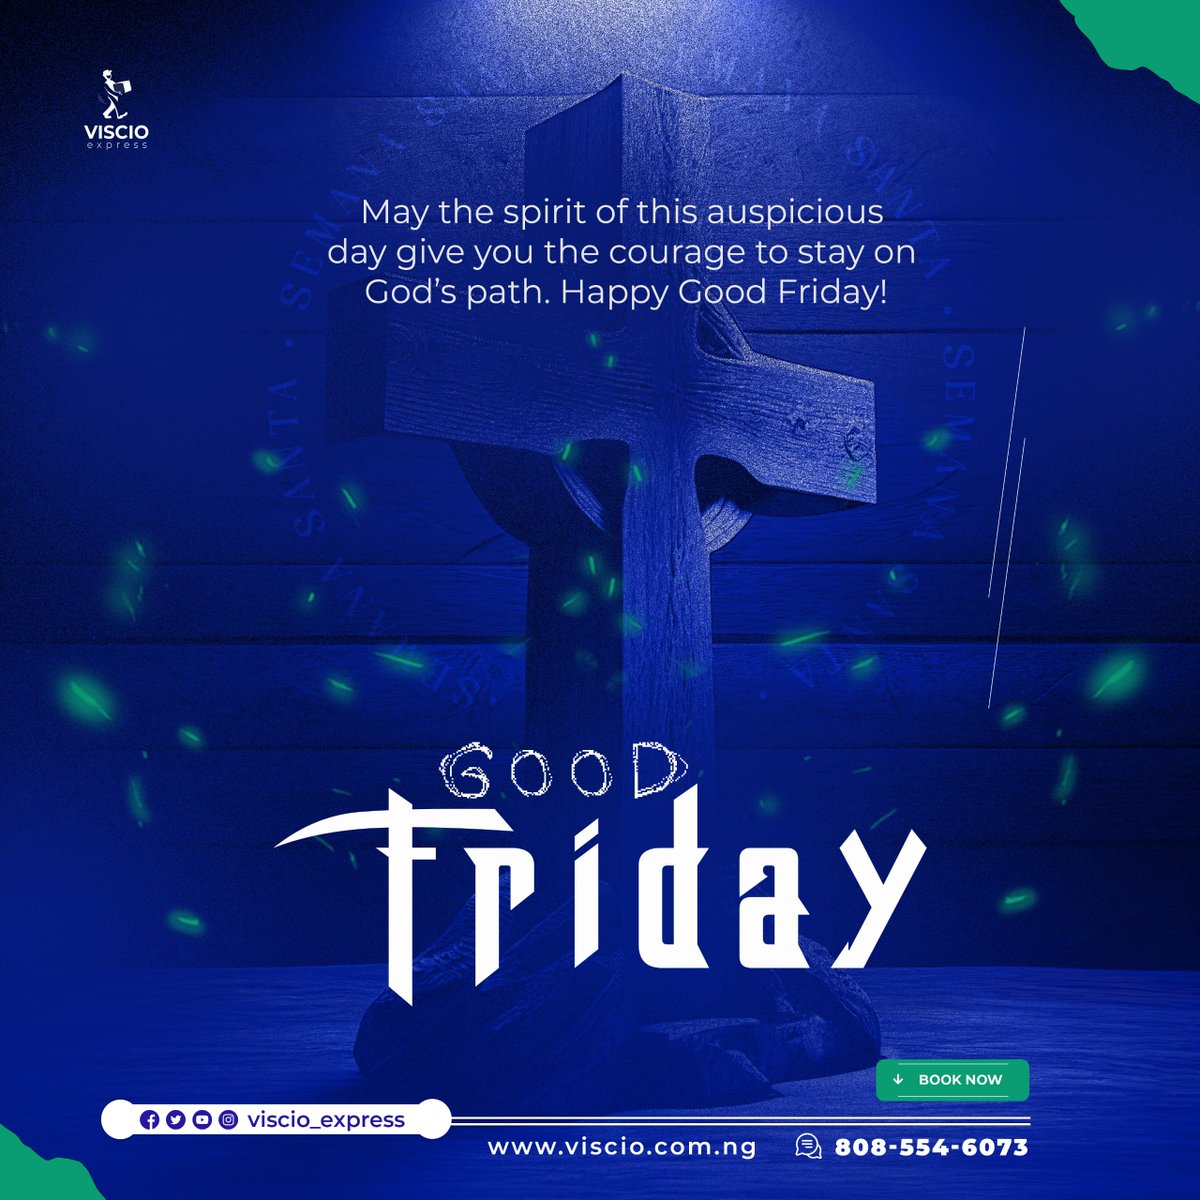 May the spirit of this auspicious day give you the courage to stay on God's path. Happy Good Friday!